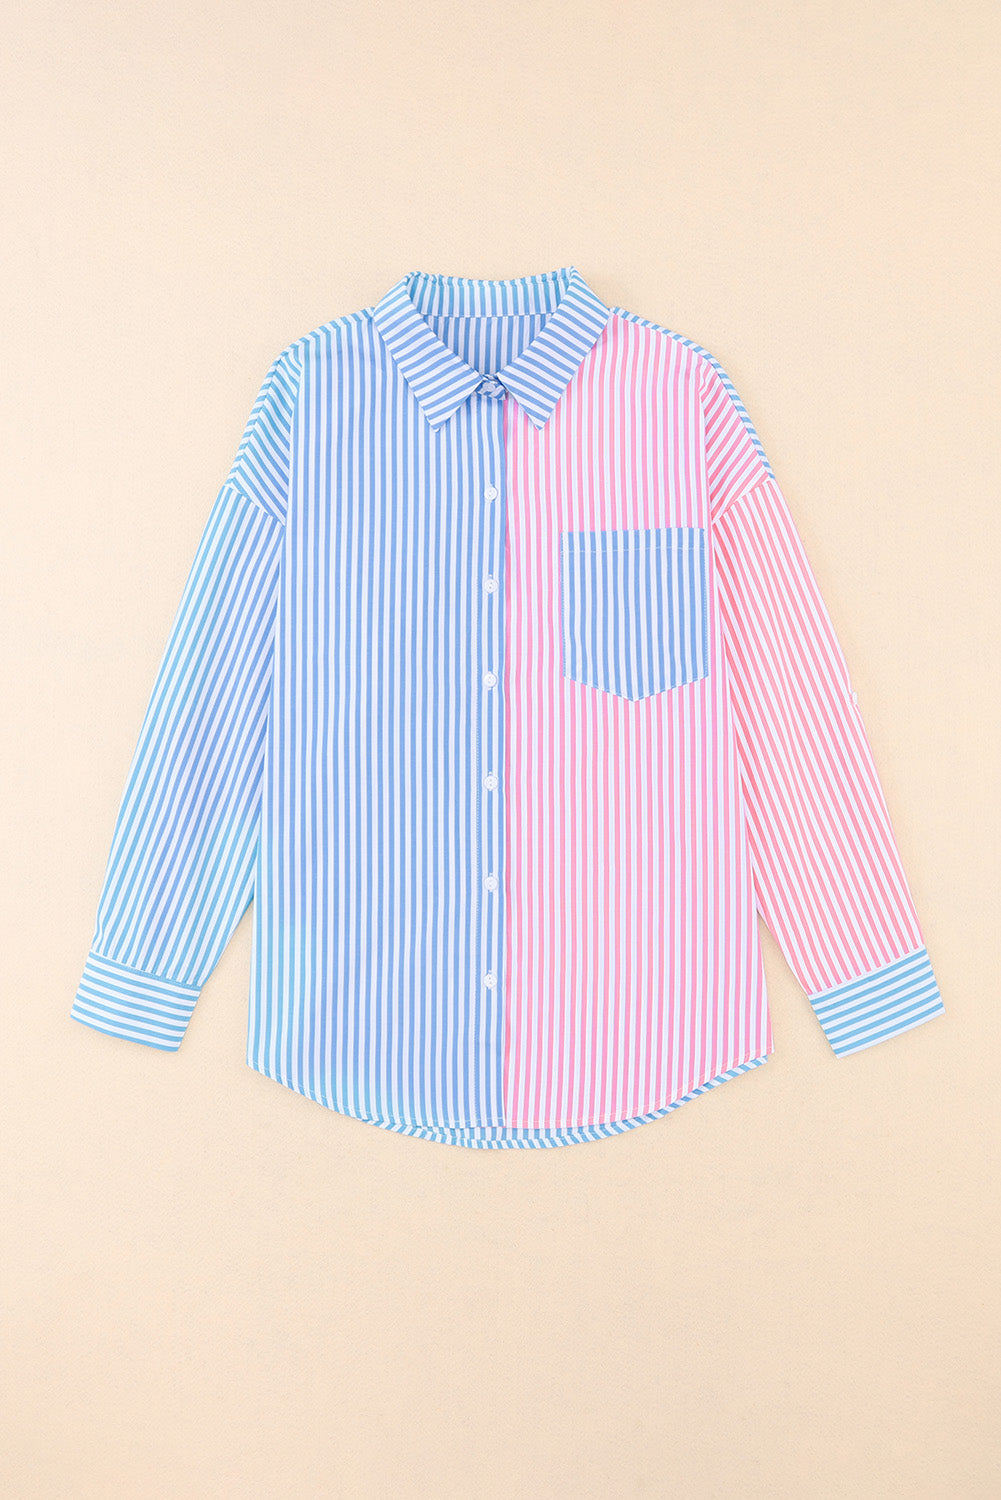 Striped Two-Tone Long Sleeve Shirt with Pocket